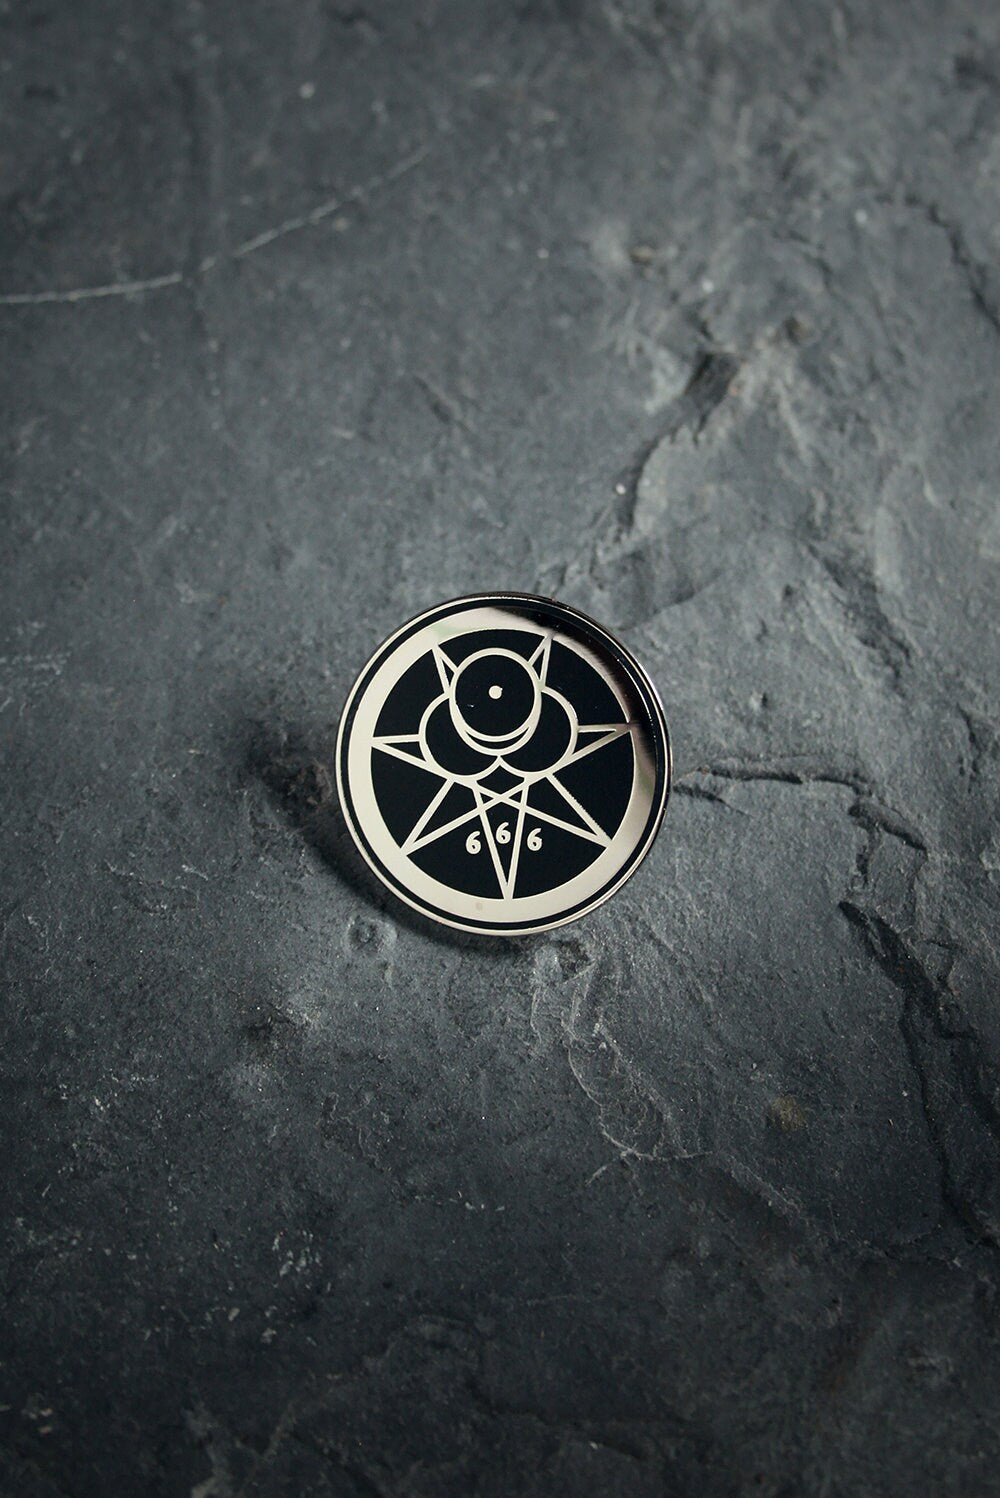 Mark of the Beast, Aleister Crowley - PIN